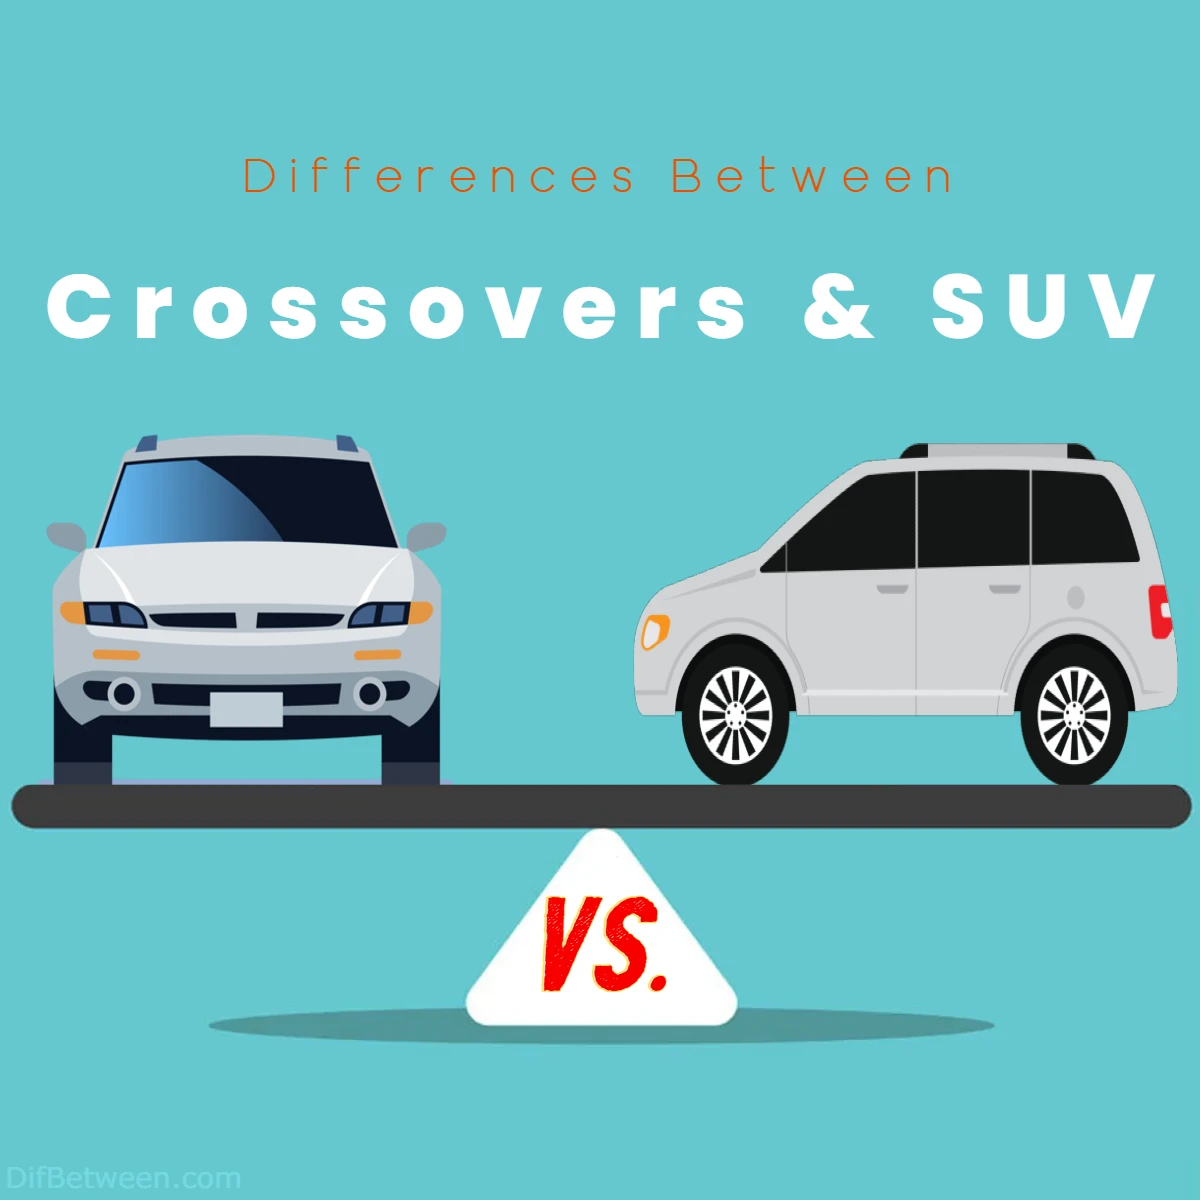 Difference Between SUVs and Crossovers